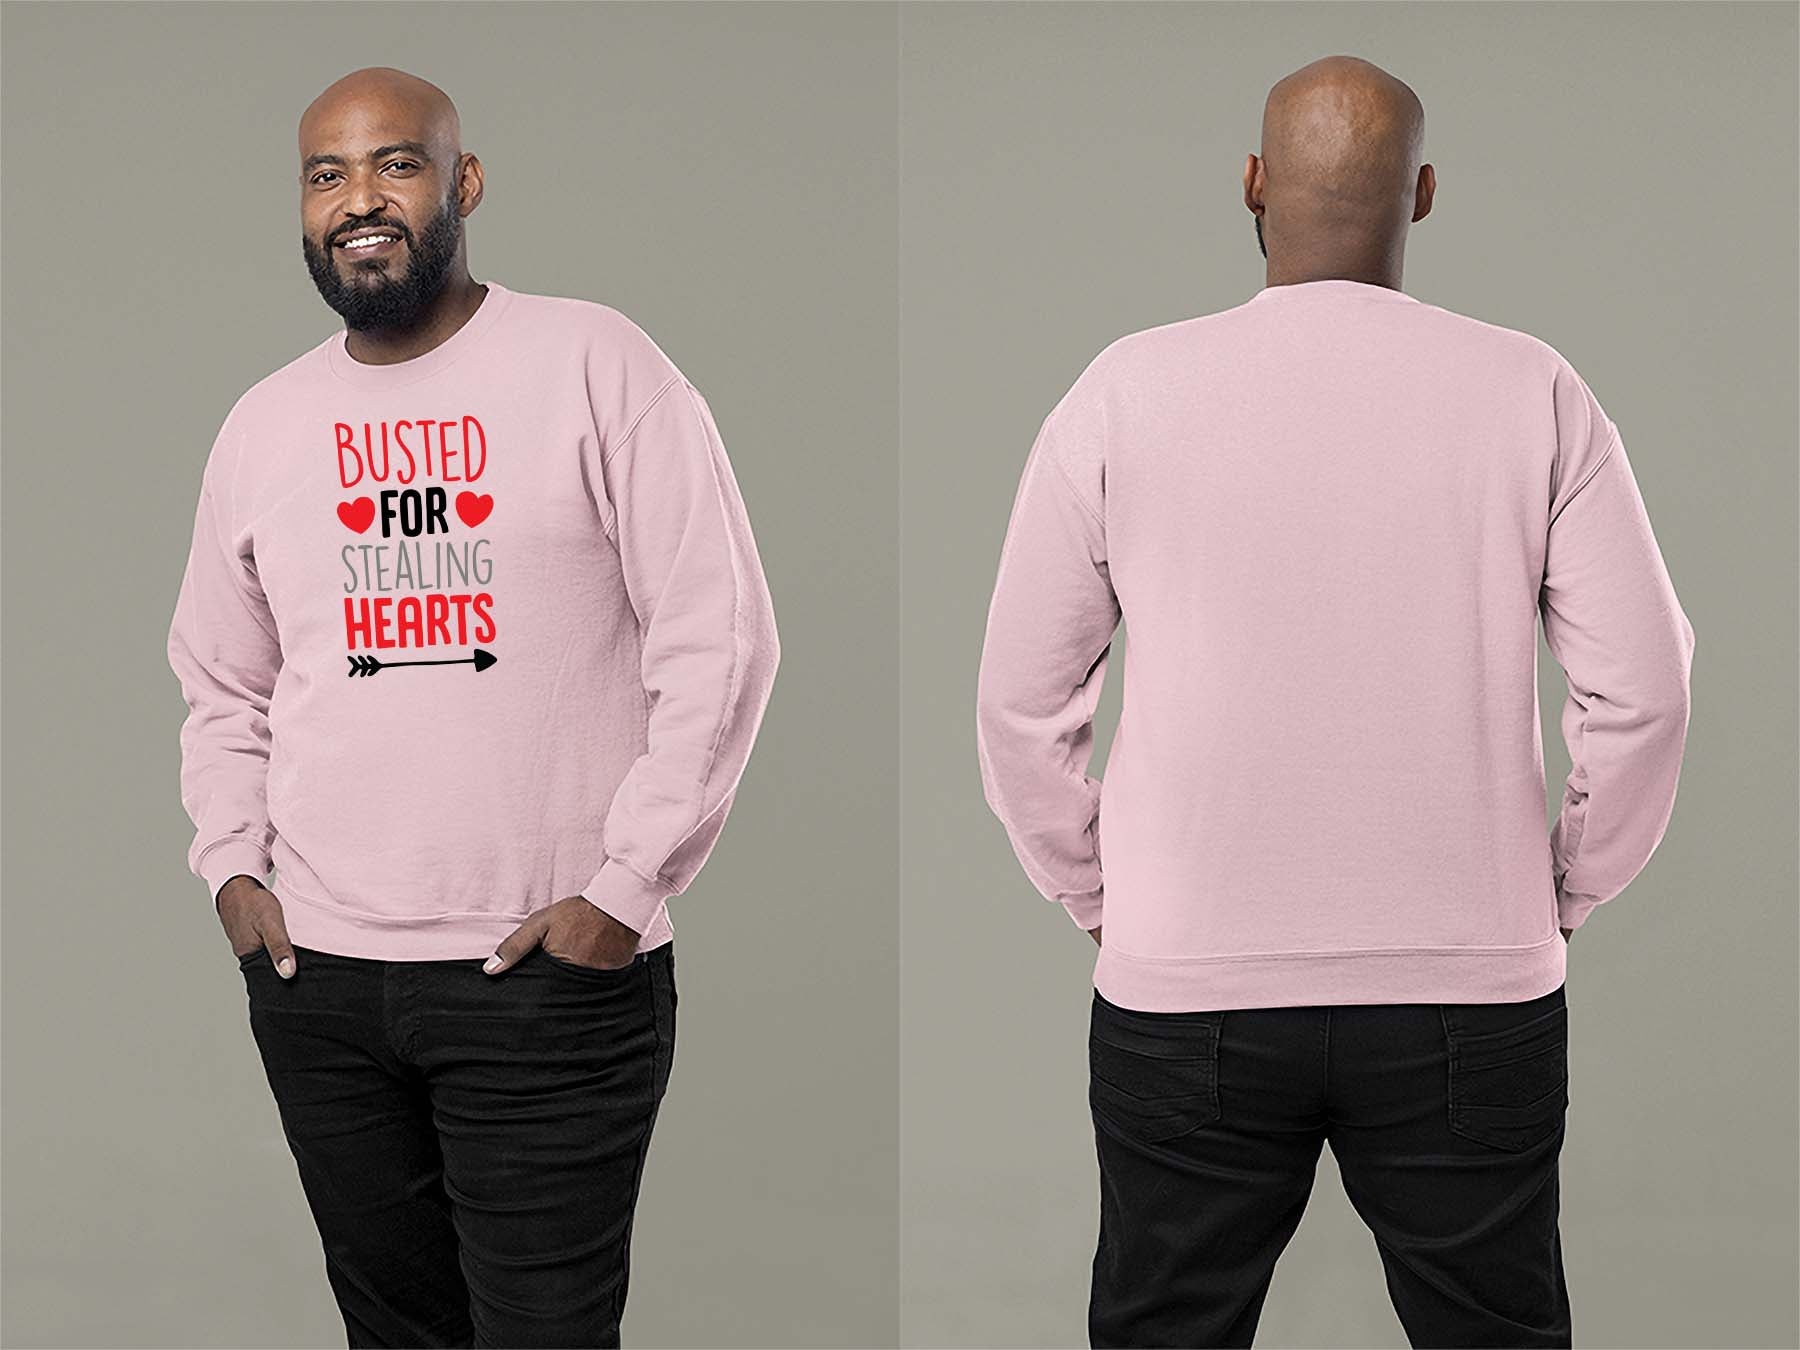 Fat Dave Busted For Stealing Hearts Sweatshirt Small Light Pink